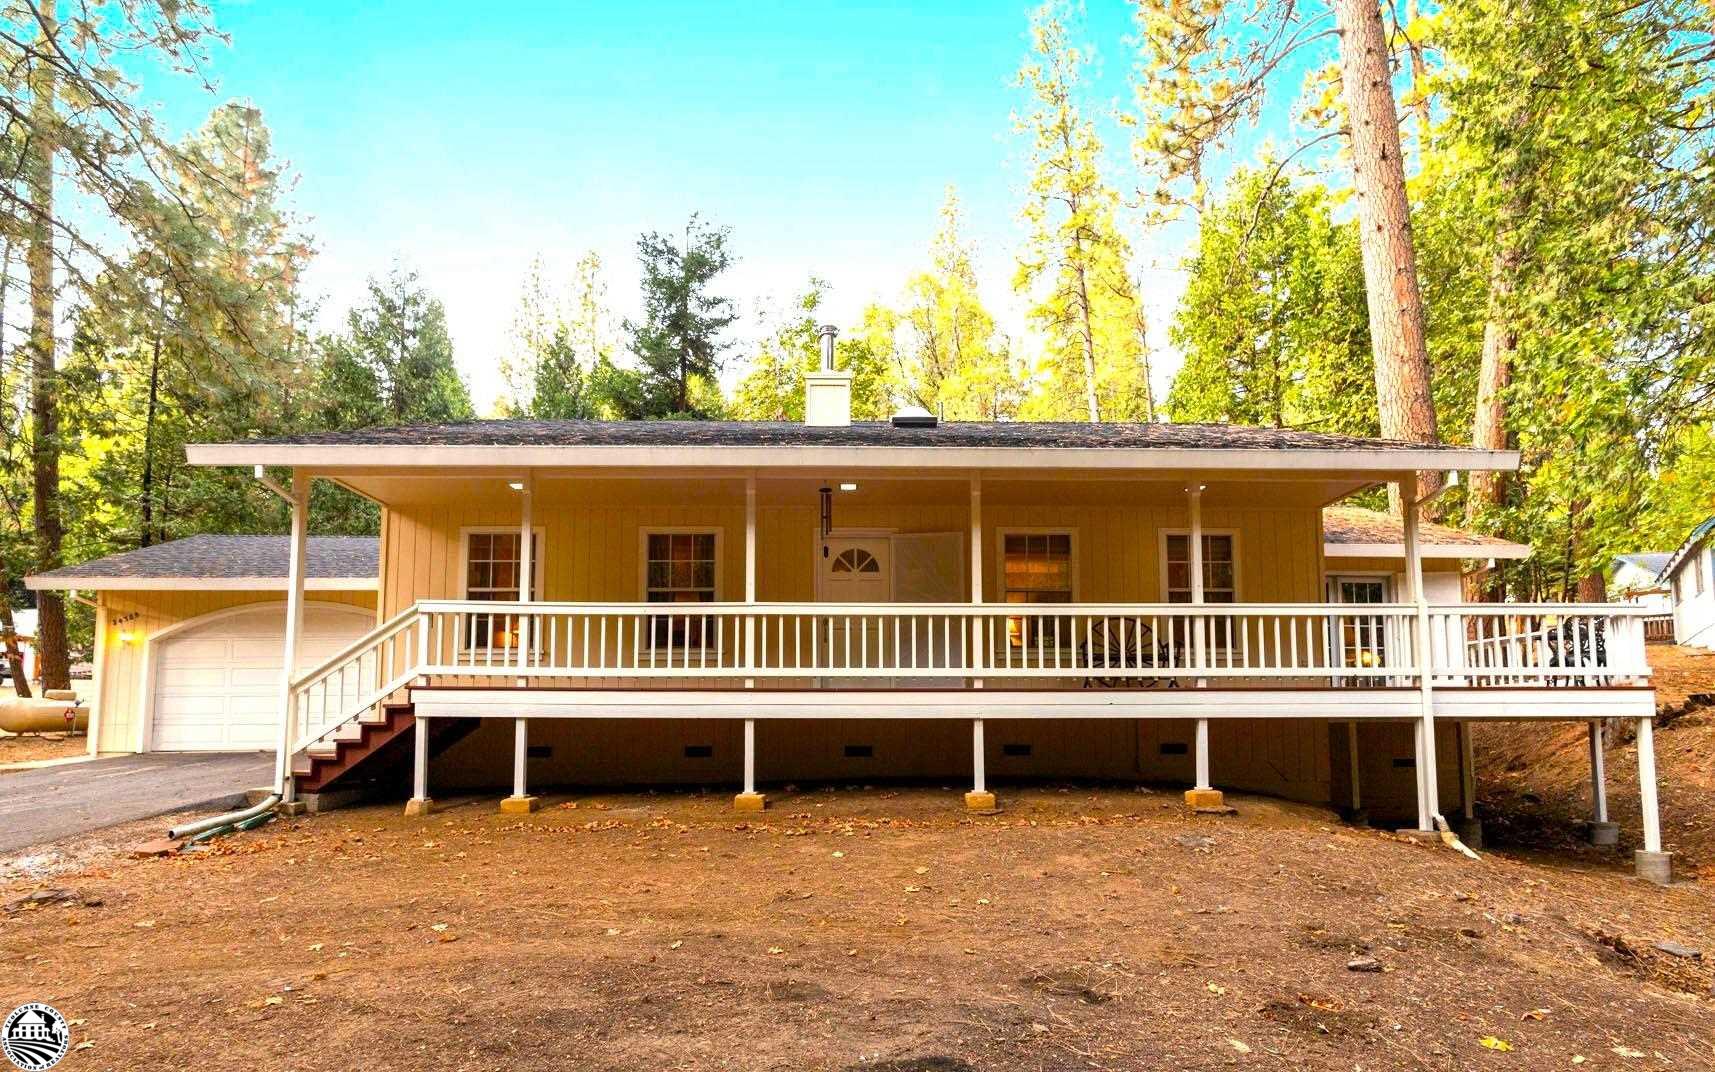 Photo of 24385 Kewin Mill Rd in Sonora, CA